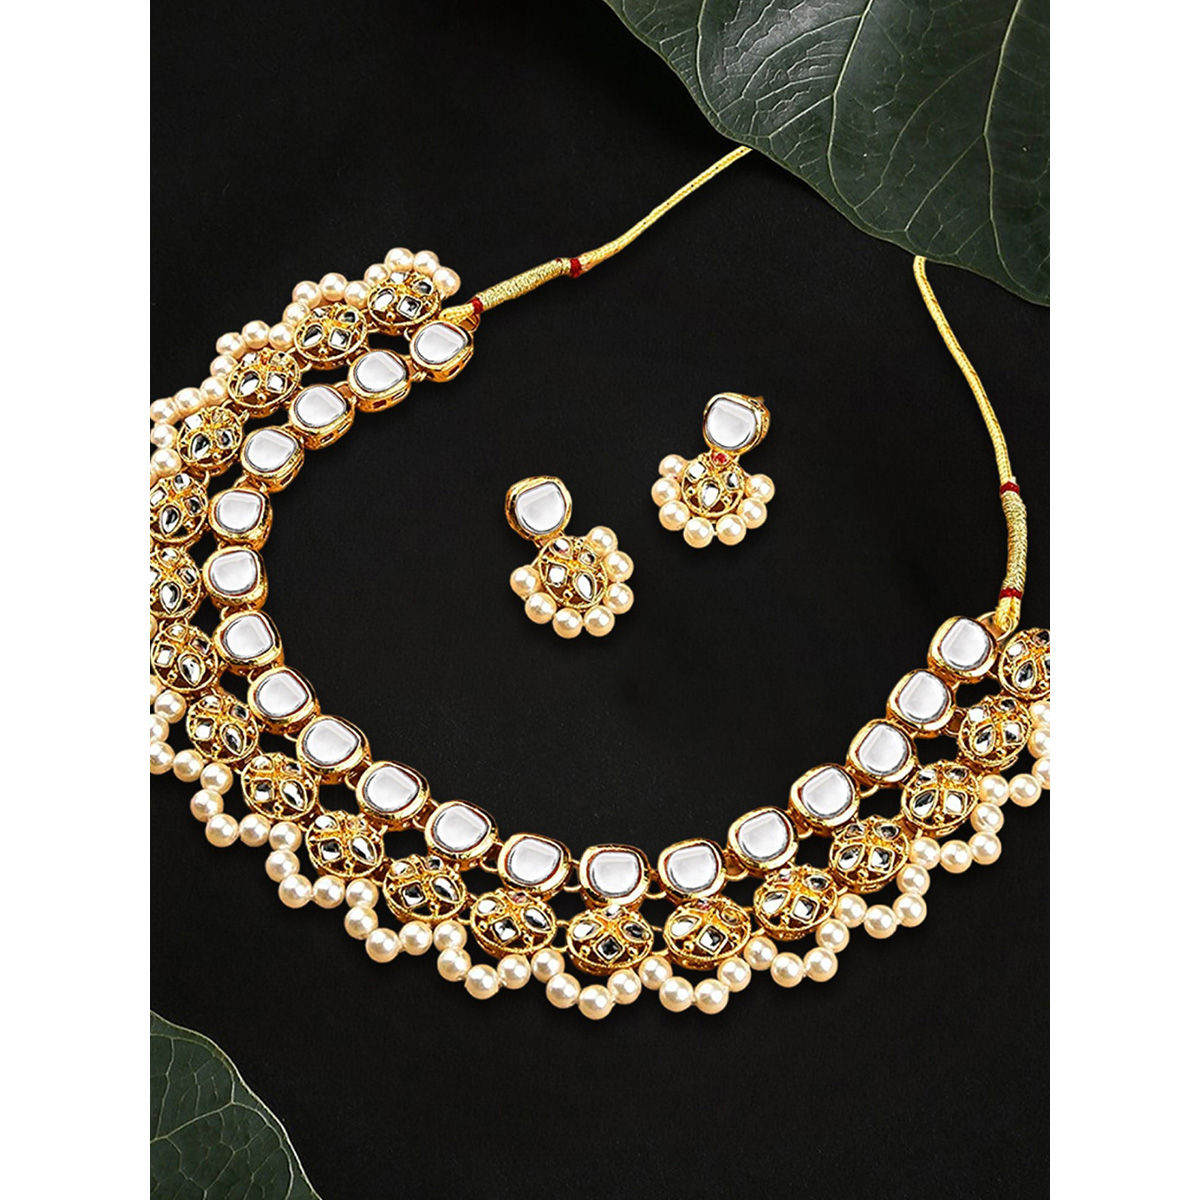 Sukkhi Glimmery Gold Plated Sky Blue & White Pearl Choker Necklace Set For  Women (Skr70440), Free Size: Buy Online at Best Price in UAE - Amazon.ae